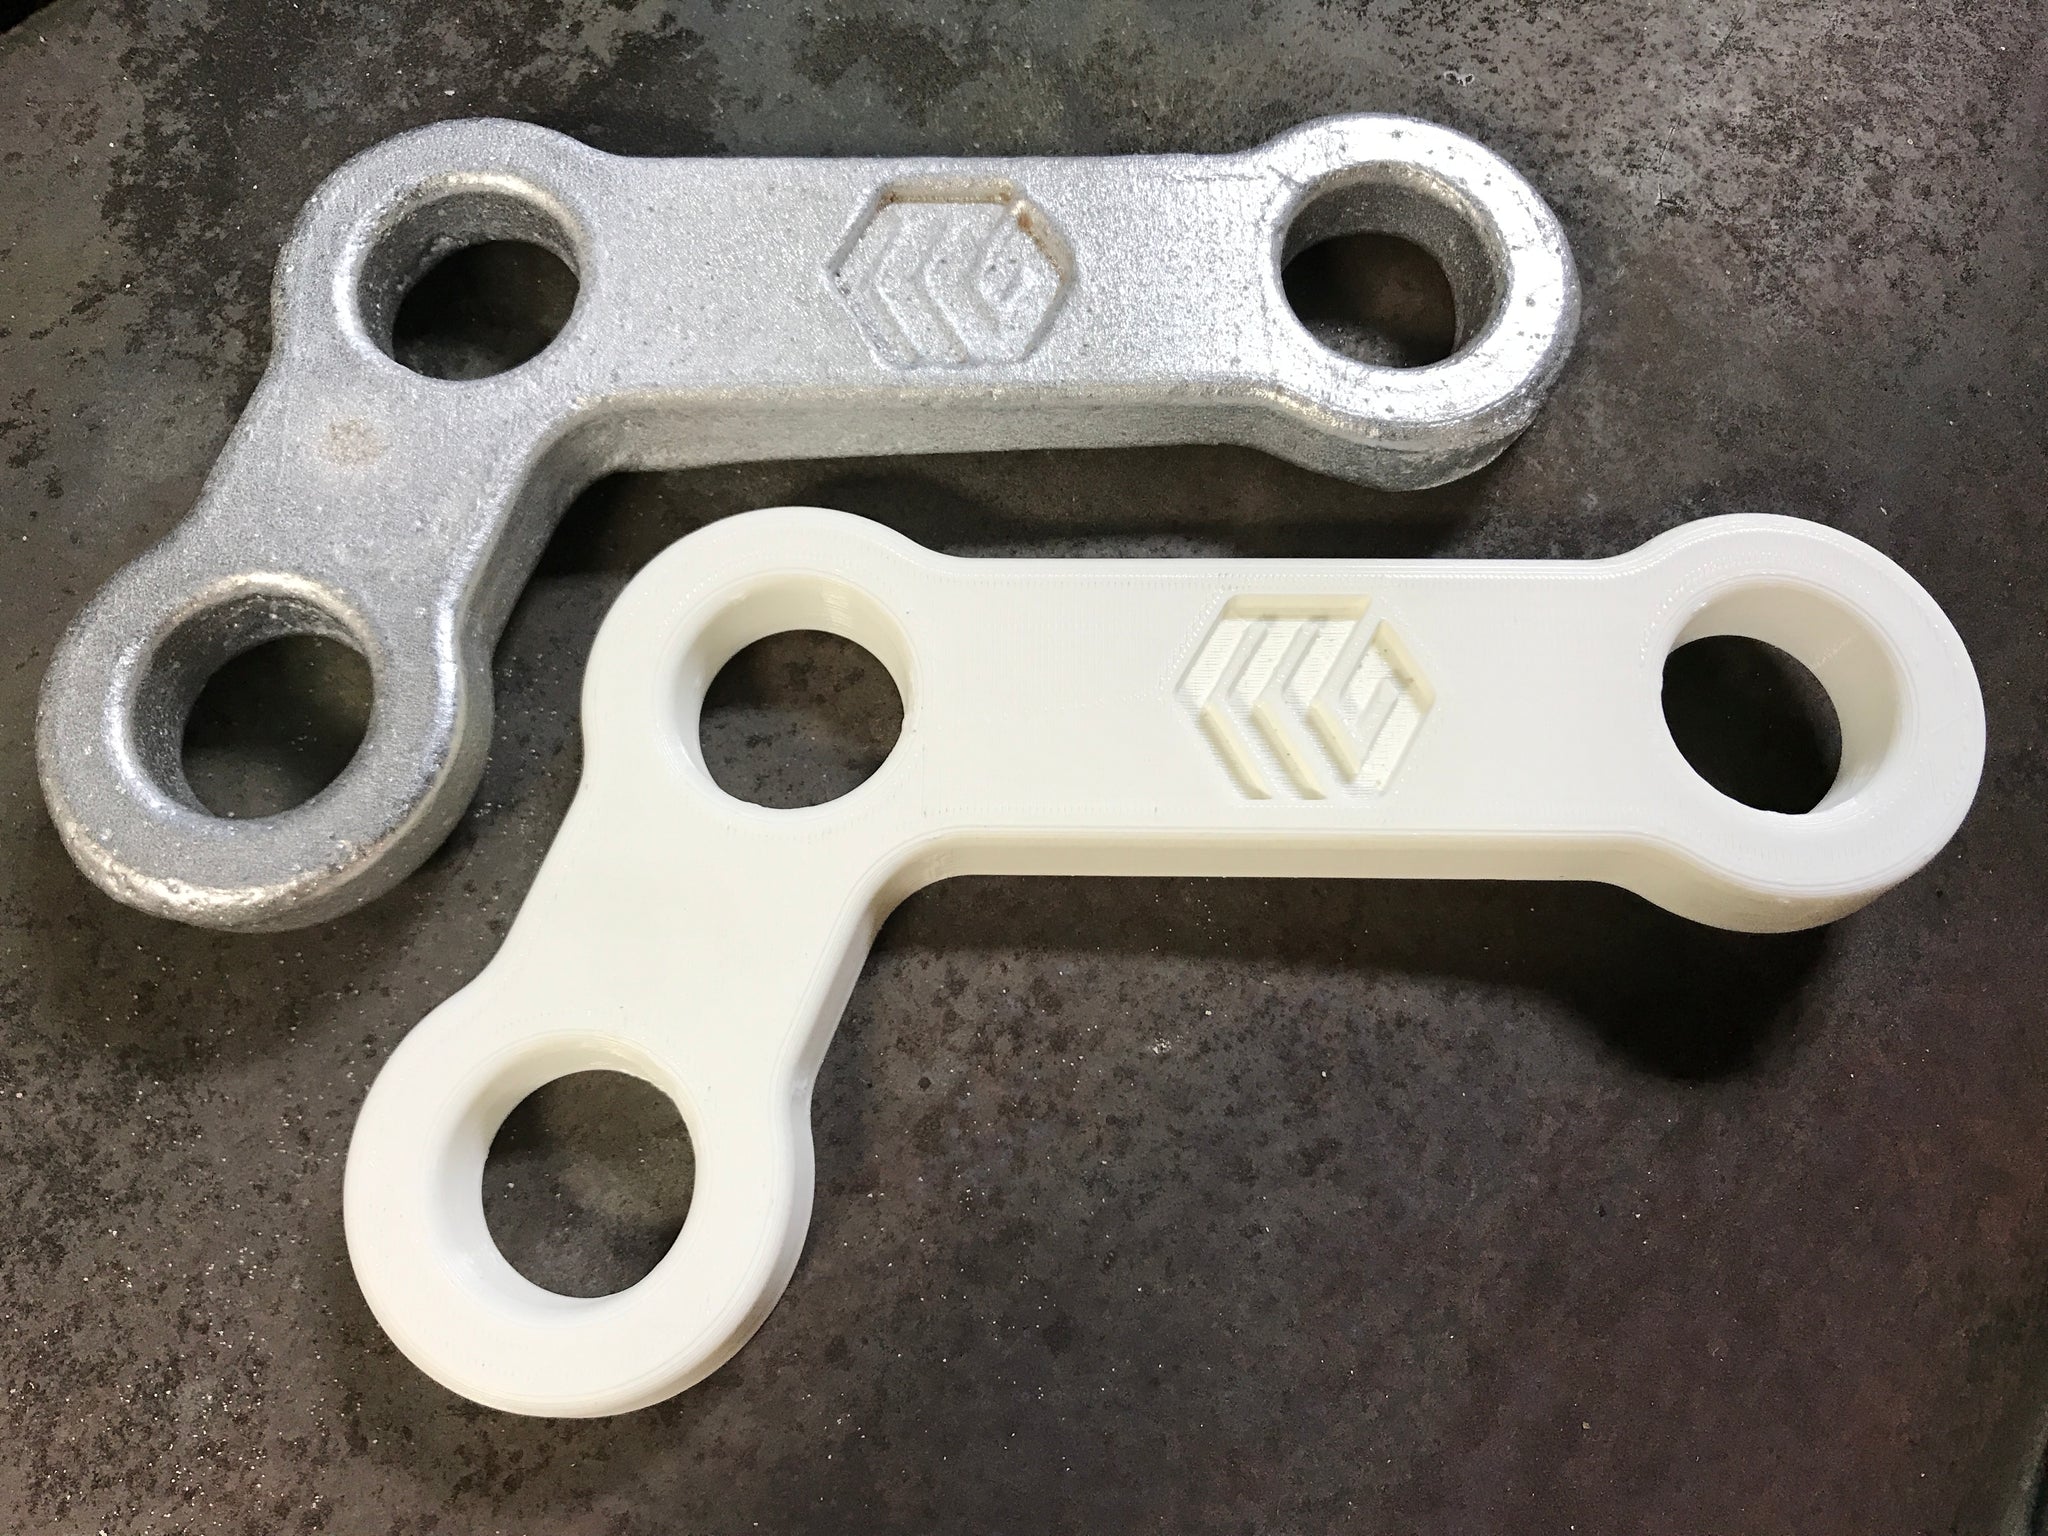 Produktion erosion Outlaw Casting Metal Parts with 3D Printed Parts | MakerGear - MakerGear™